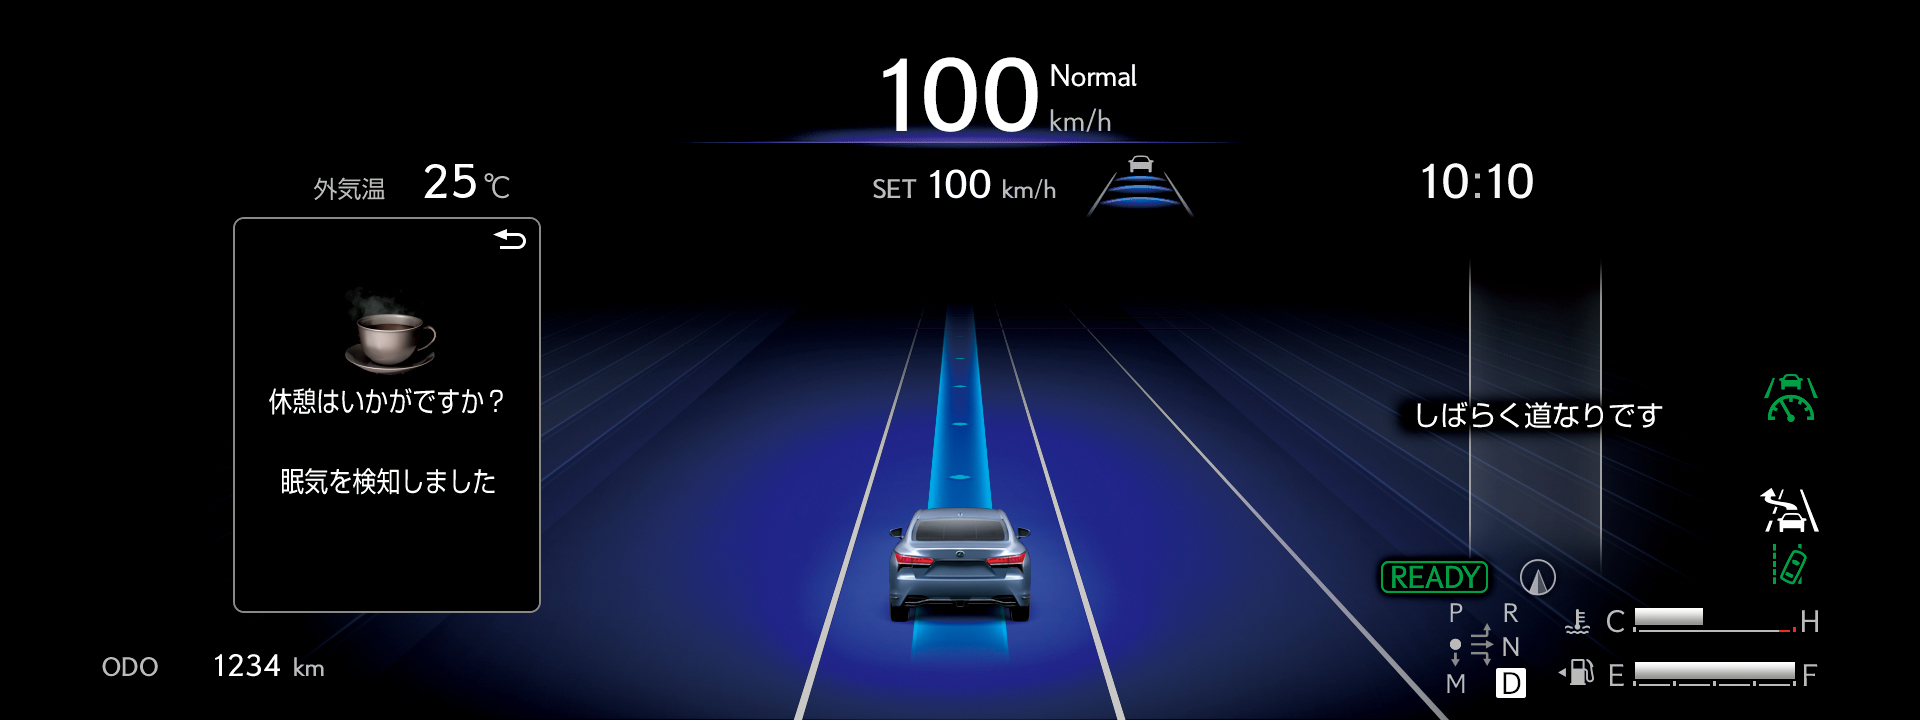 Driver Assistance, Denso Claims World's Largest Auto Head-up Display